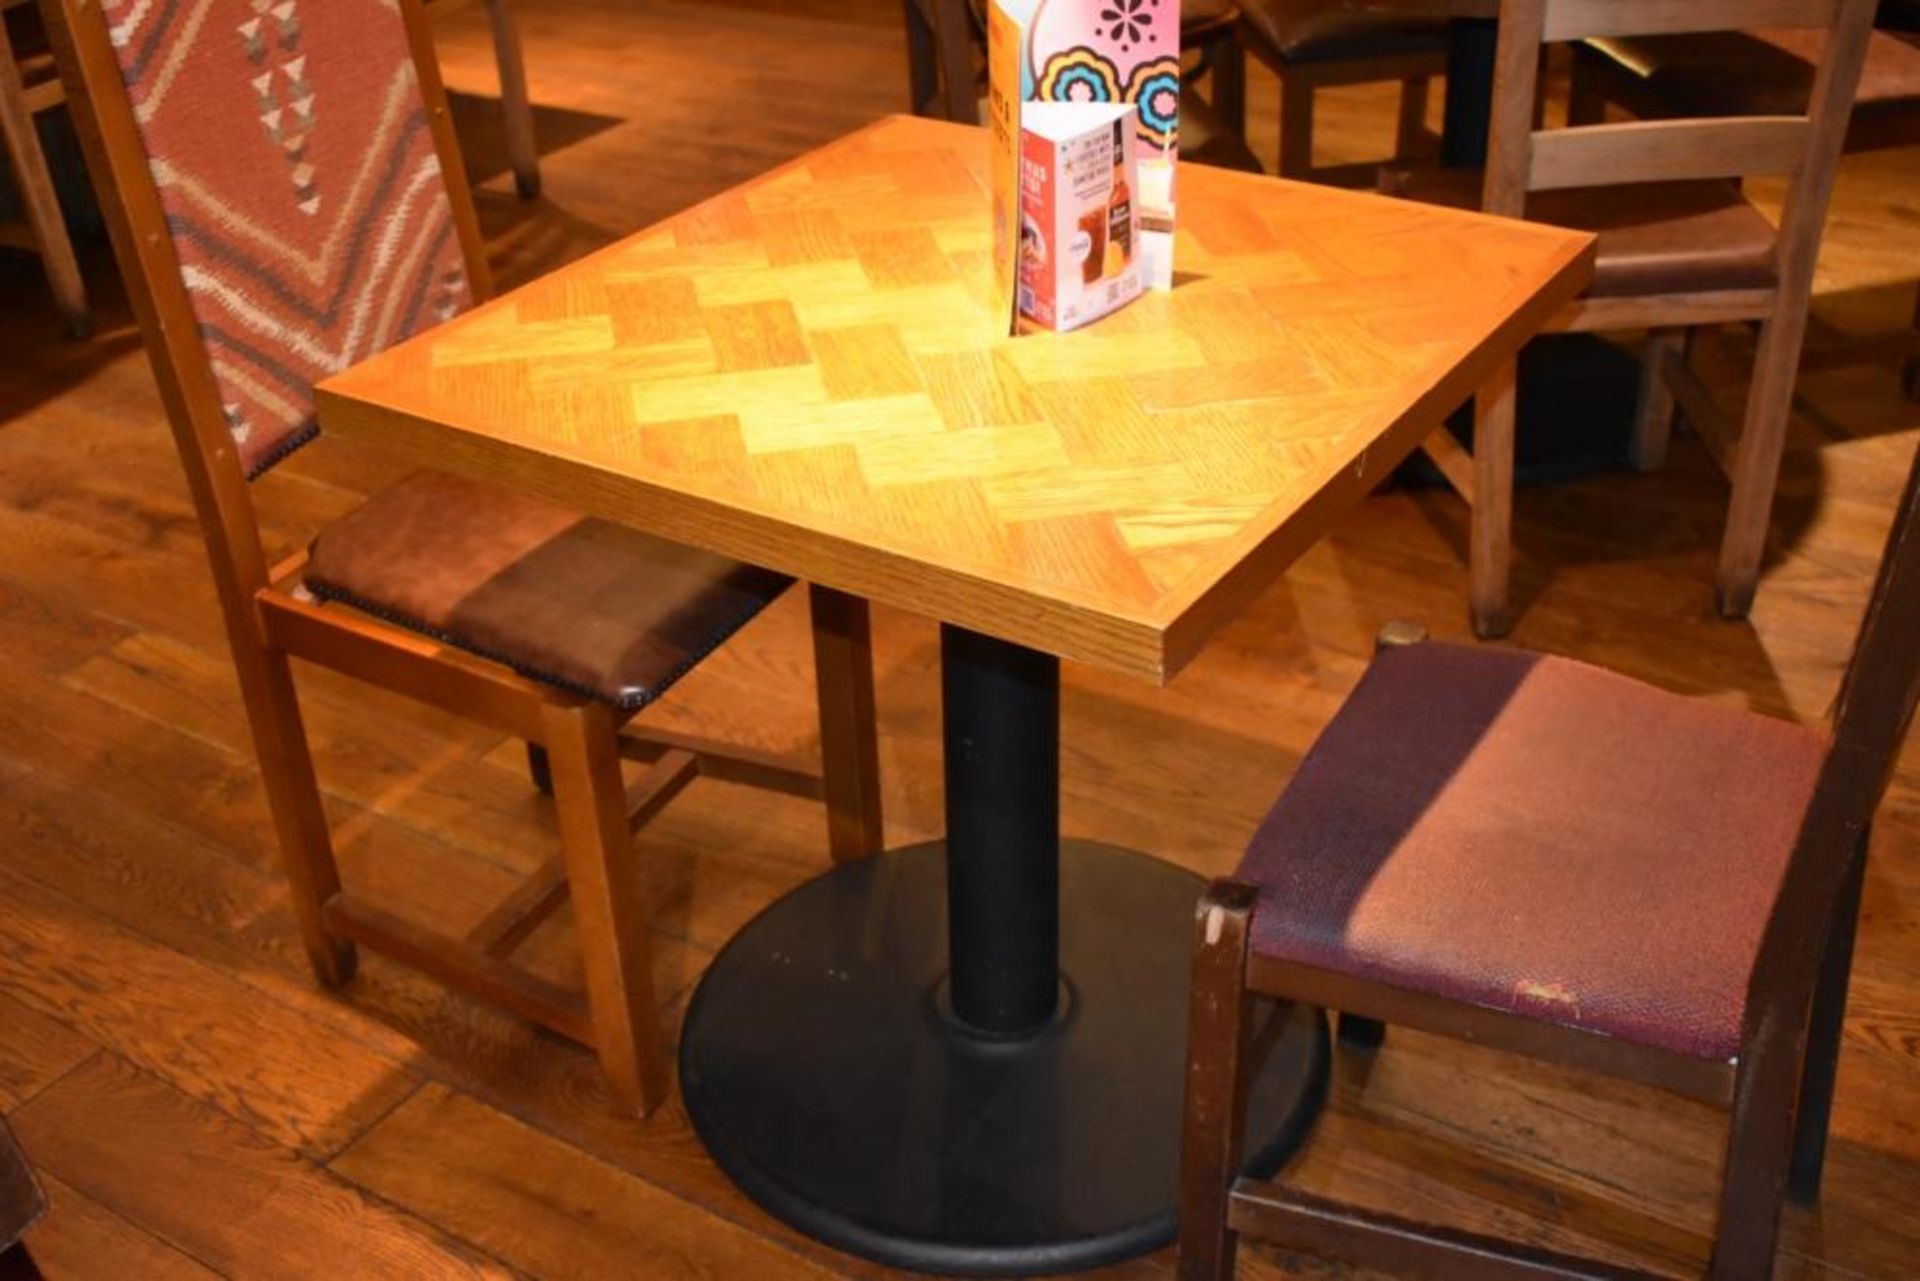 2 x Two Seater Restaurant Dining Tables With Parquet Style Tops and Cast Iron Bases - Image 7 of 9